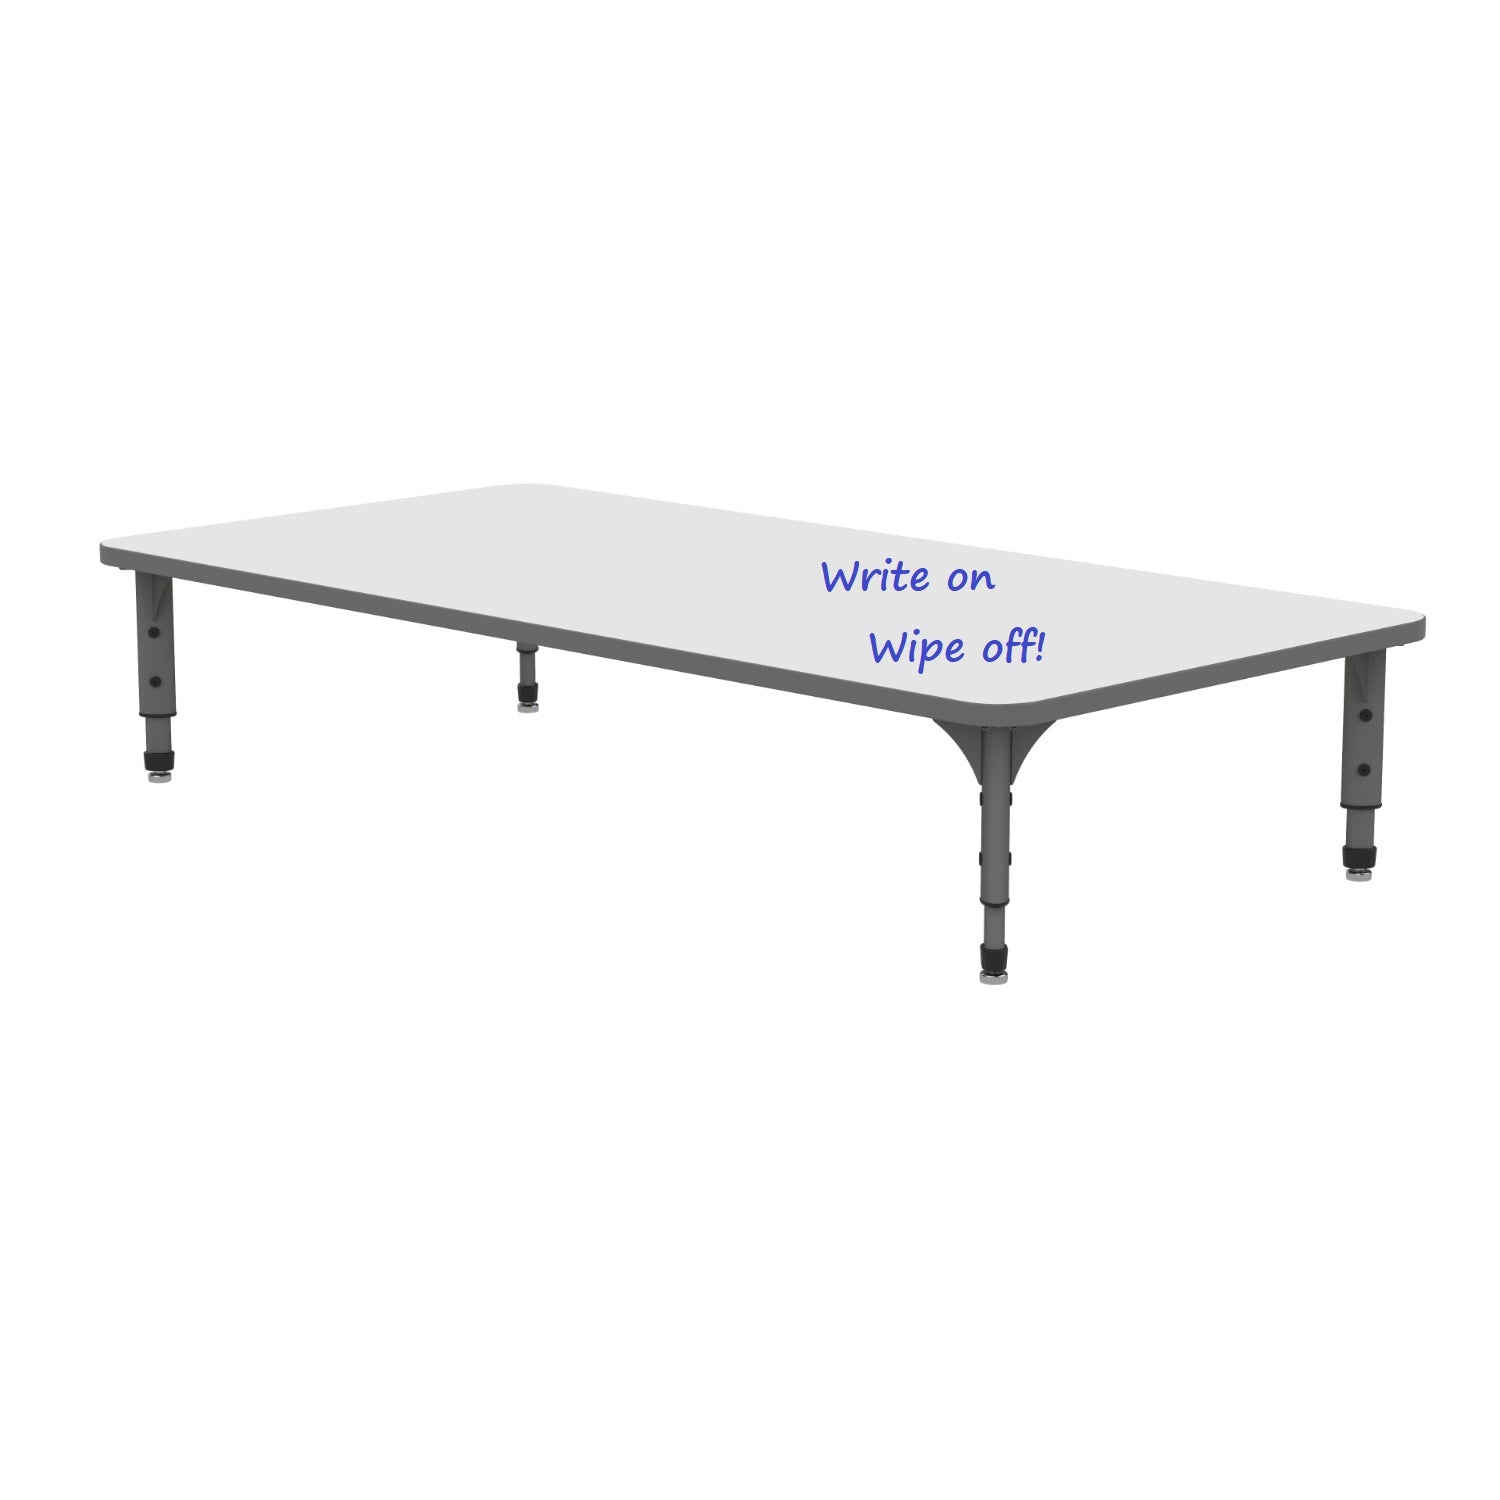 Adjustable Height Floor Activity Table with White Dry-Erase Markerboard Top, 36" x 72" Rectangle